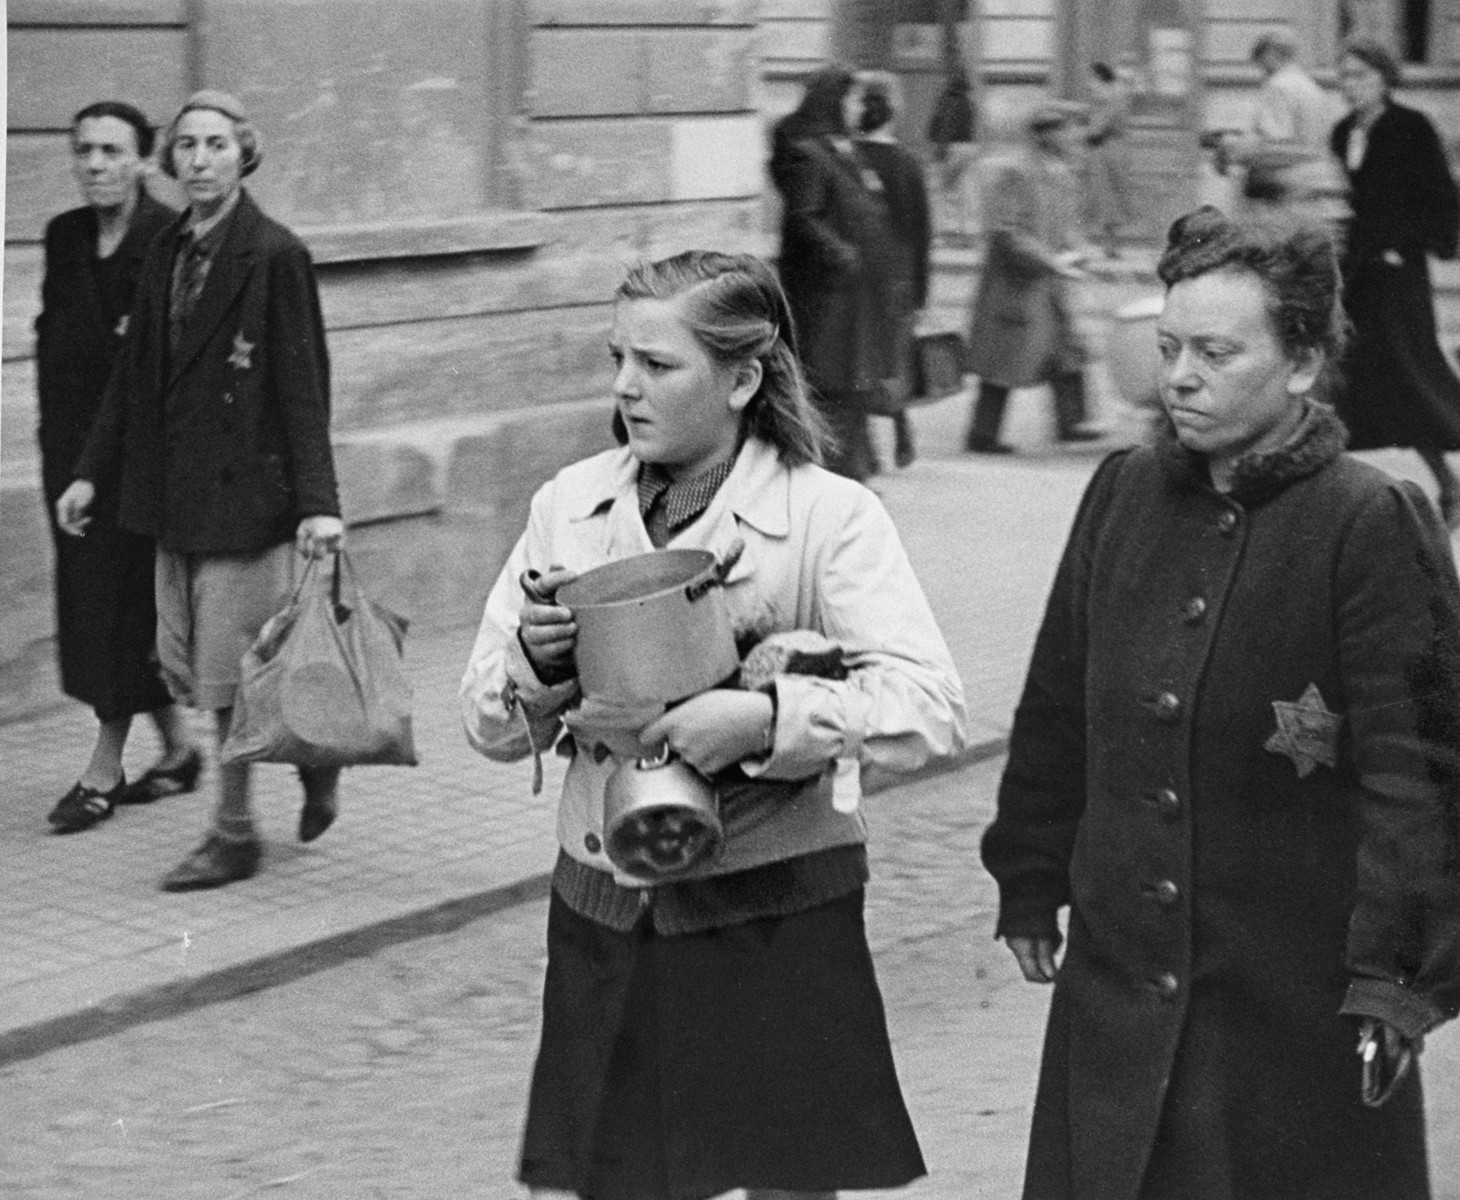 A teenage girl carries two small pots along a street in Theresienstadt.  Some of the Jews pictured appear to be new arrivals. [oversized photo]